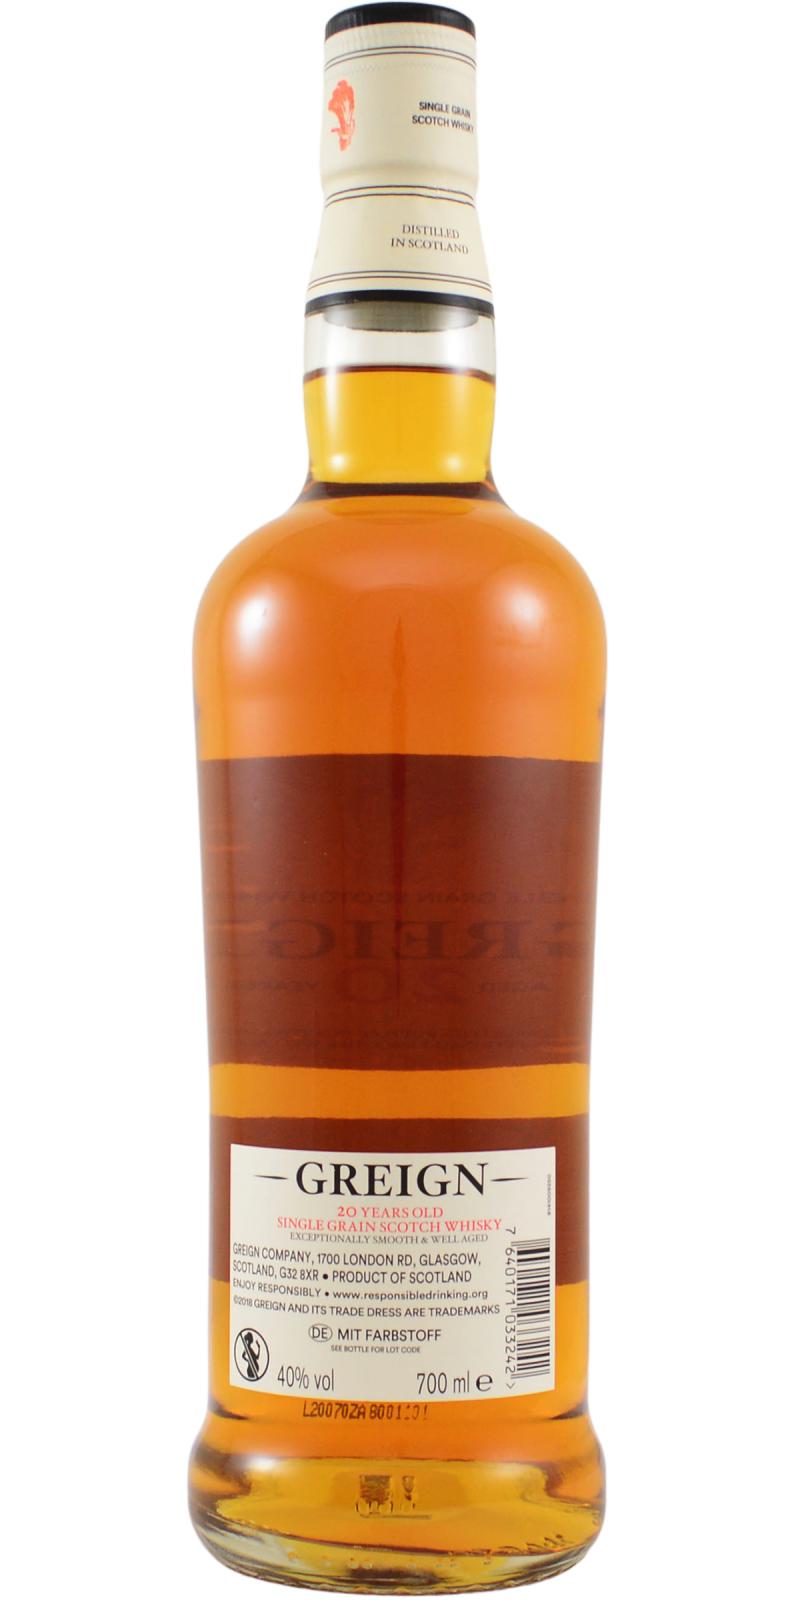 Greign 20-year-old JD&S